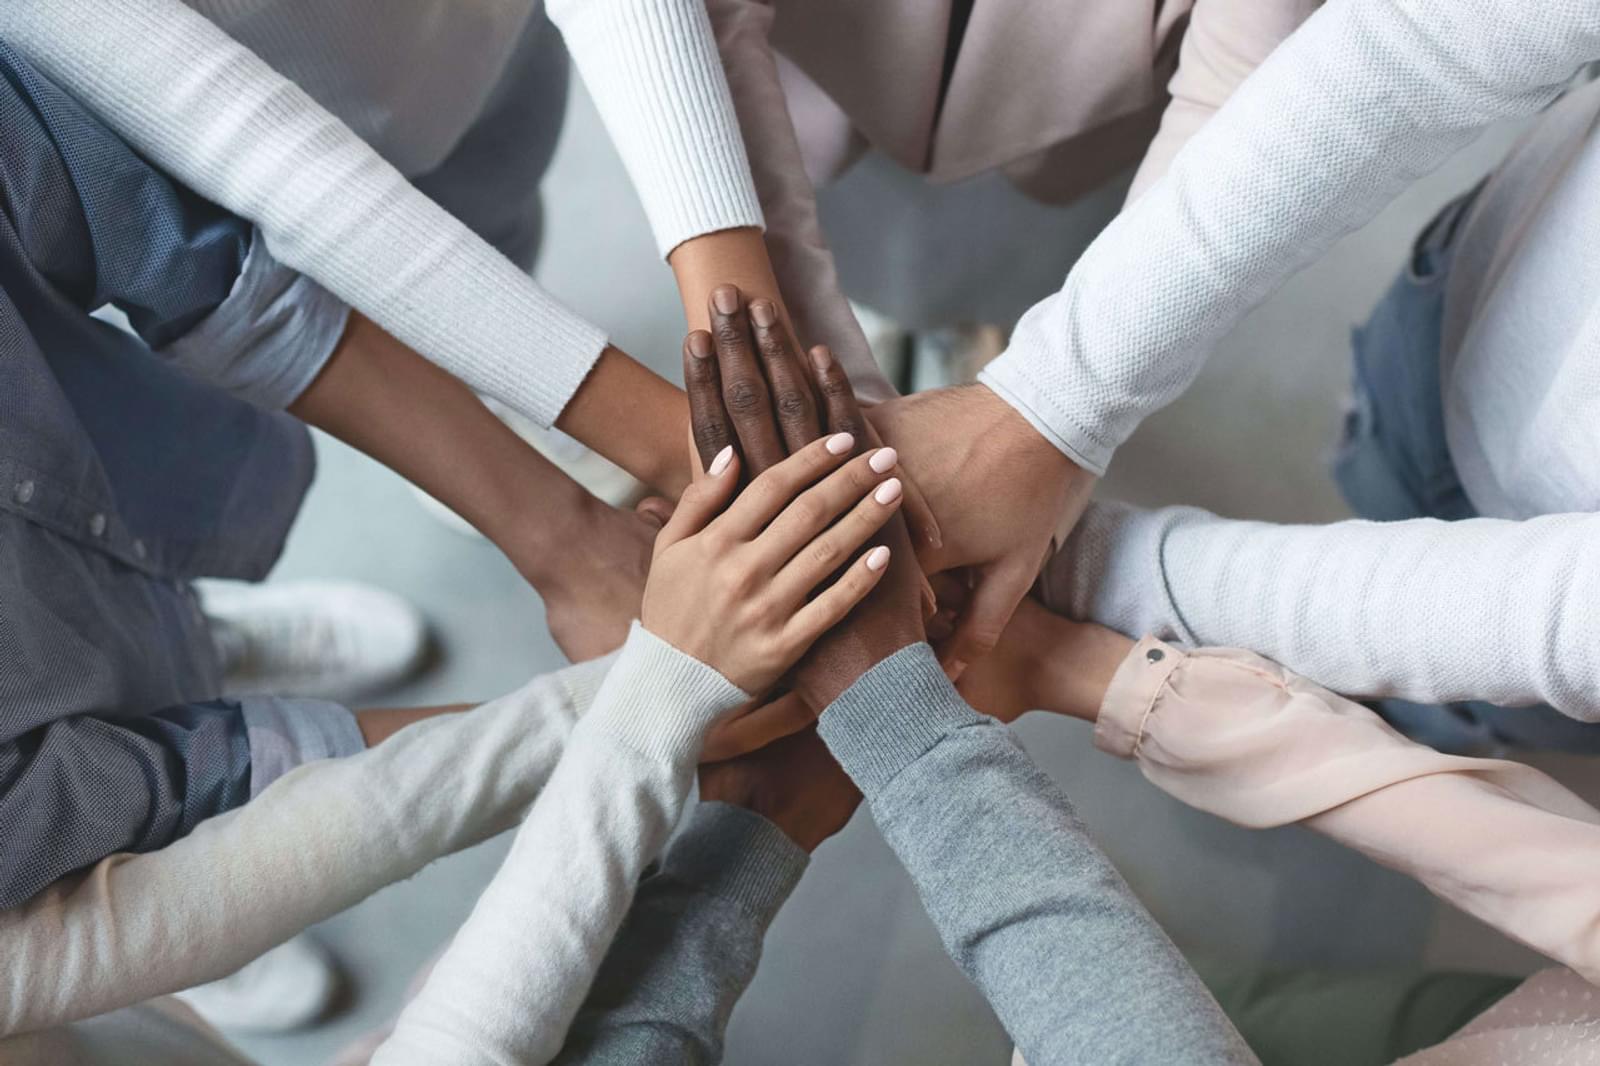 Business partners community team putting hands together on top of each other